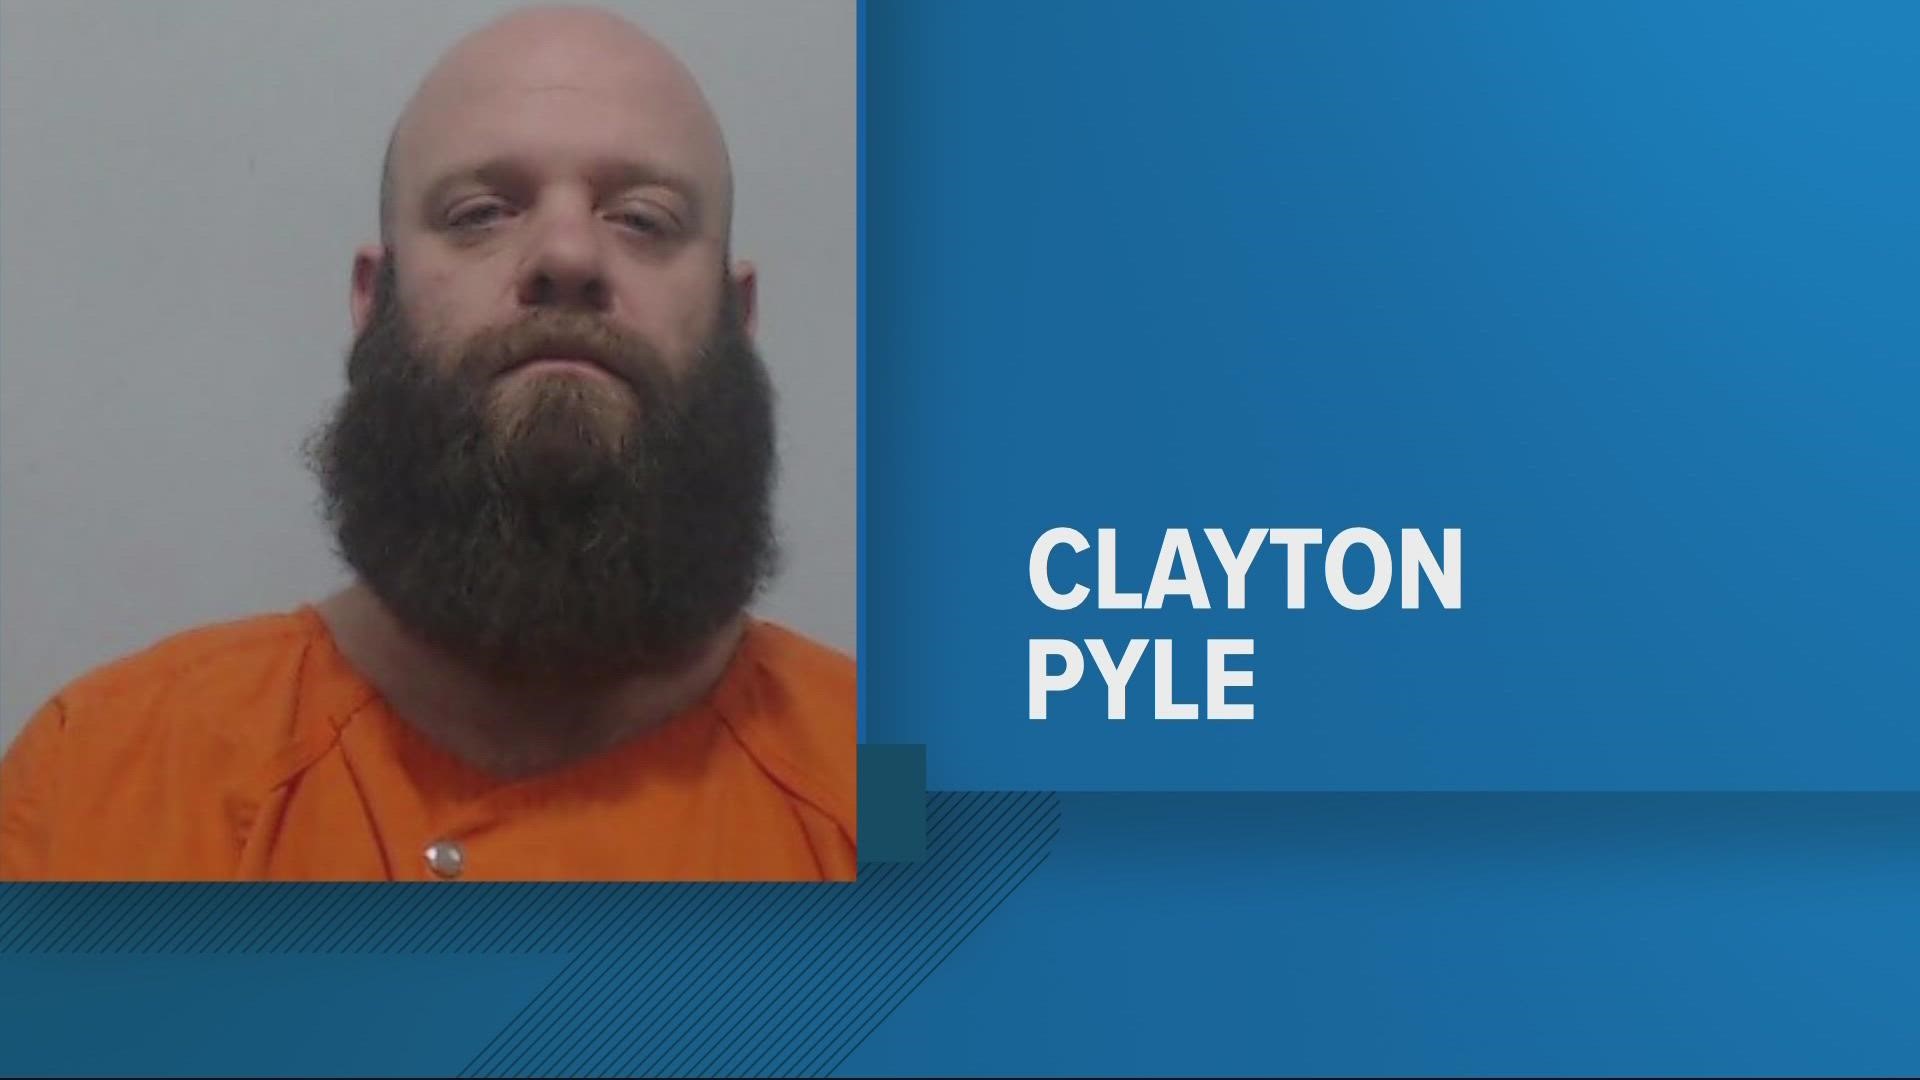 At the request of the sheriff, Clayton Pyle was extradited back to Florida and was booked into the Columbia County Detention Facility.